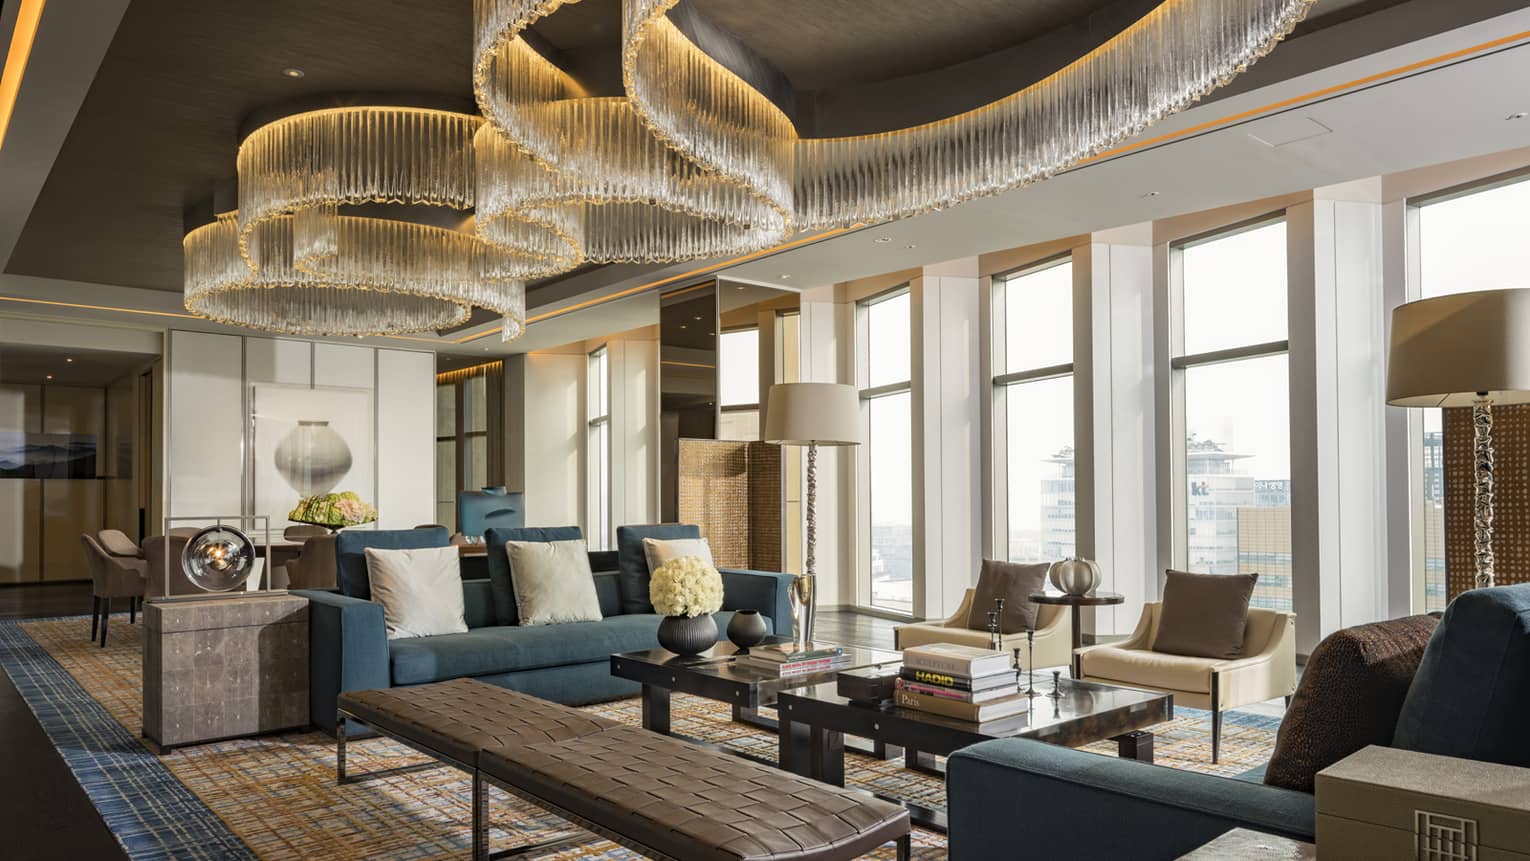 Presidential Suite seating area with large blue sofas, long leather bench, tables under modern chandeliers from soaring ceilings